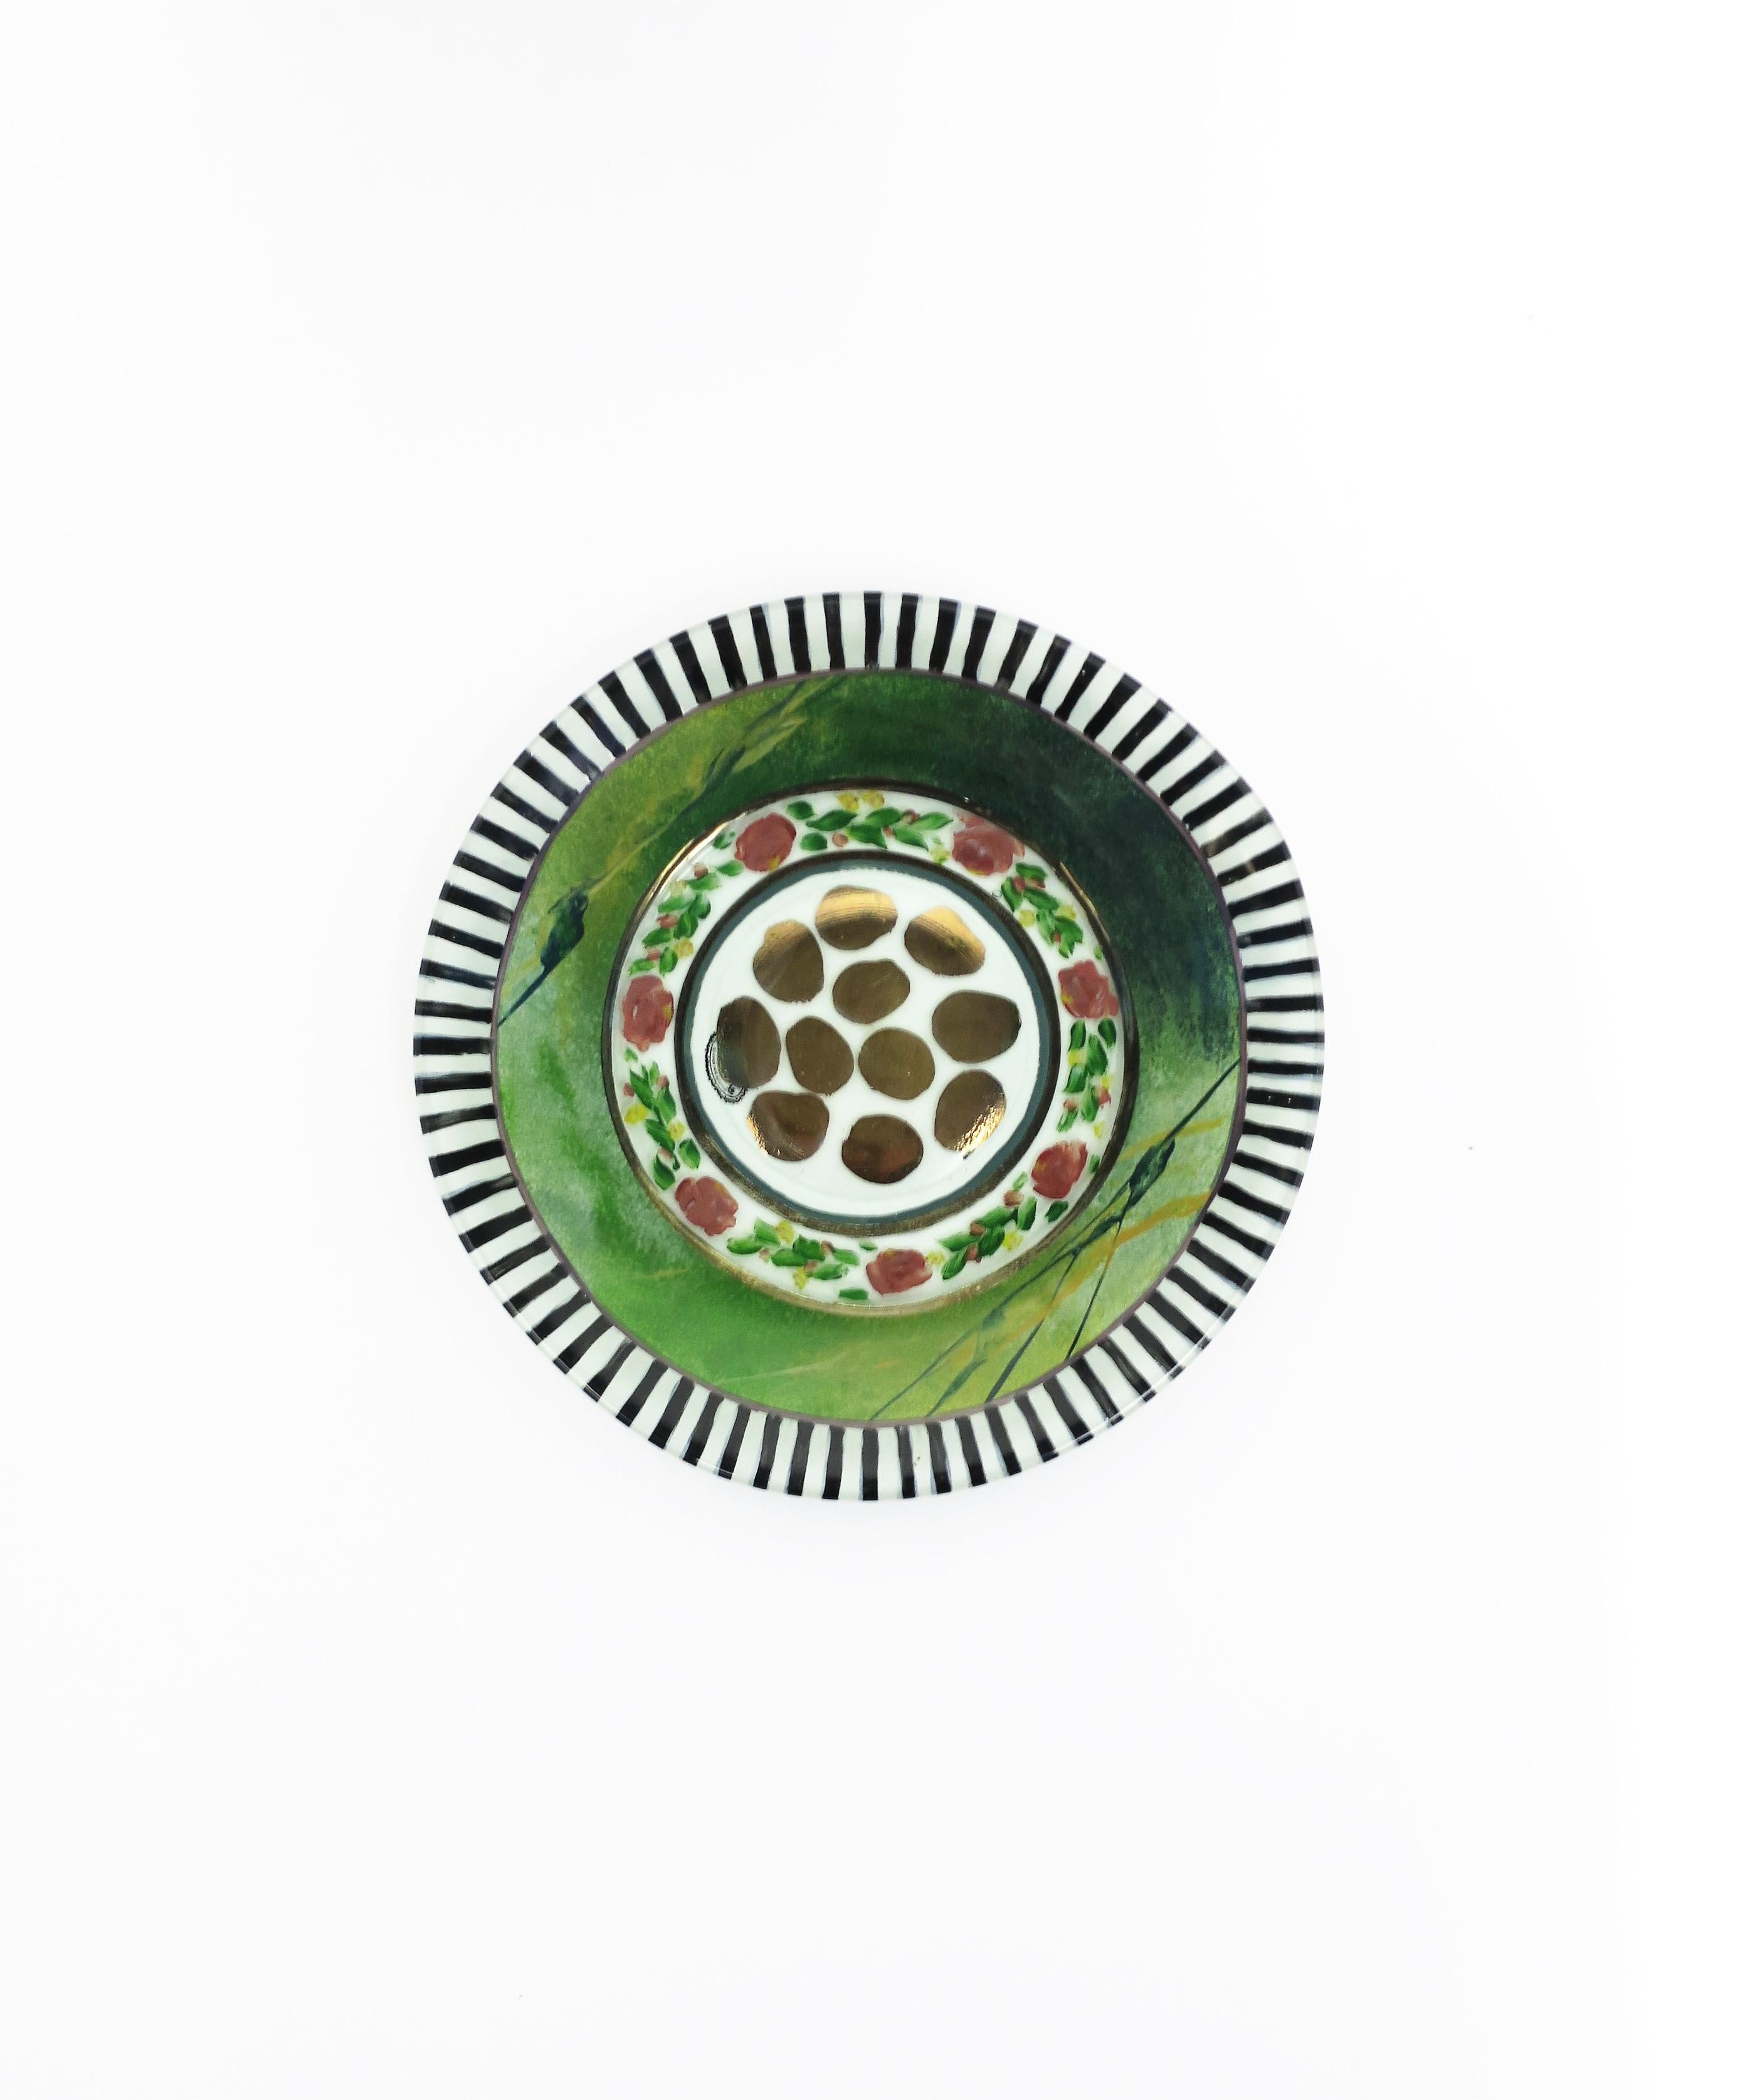 A beautiful authentic designer plate or dish by designers' MacKenzie-Childs, circa 1990s, New York. A rare piece, hand-painted plate with a black and white boarder edge, Kelly green and floral circular design, and gold animal-like spots at center.